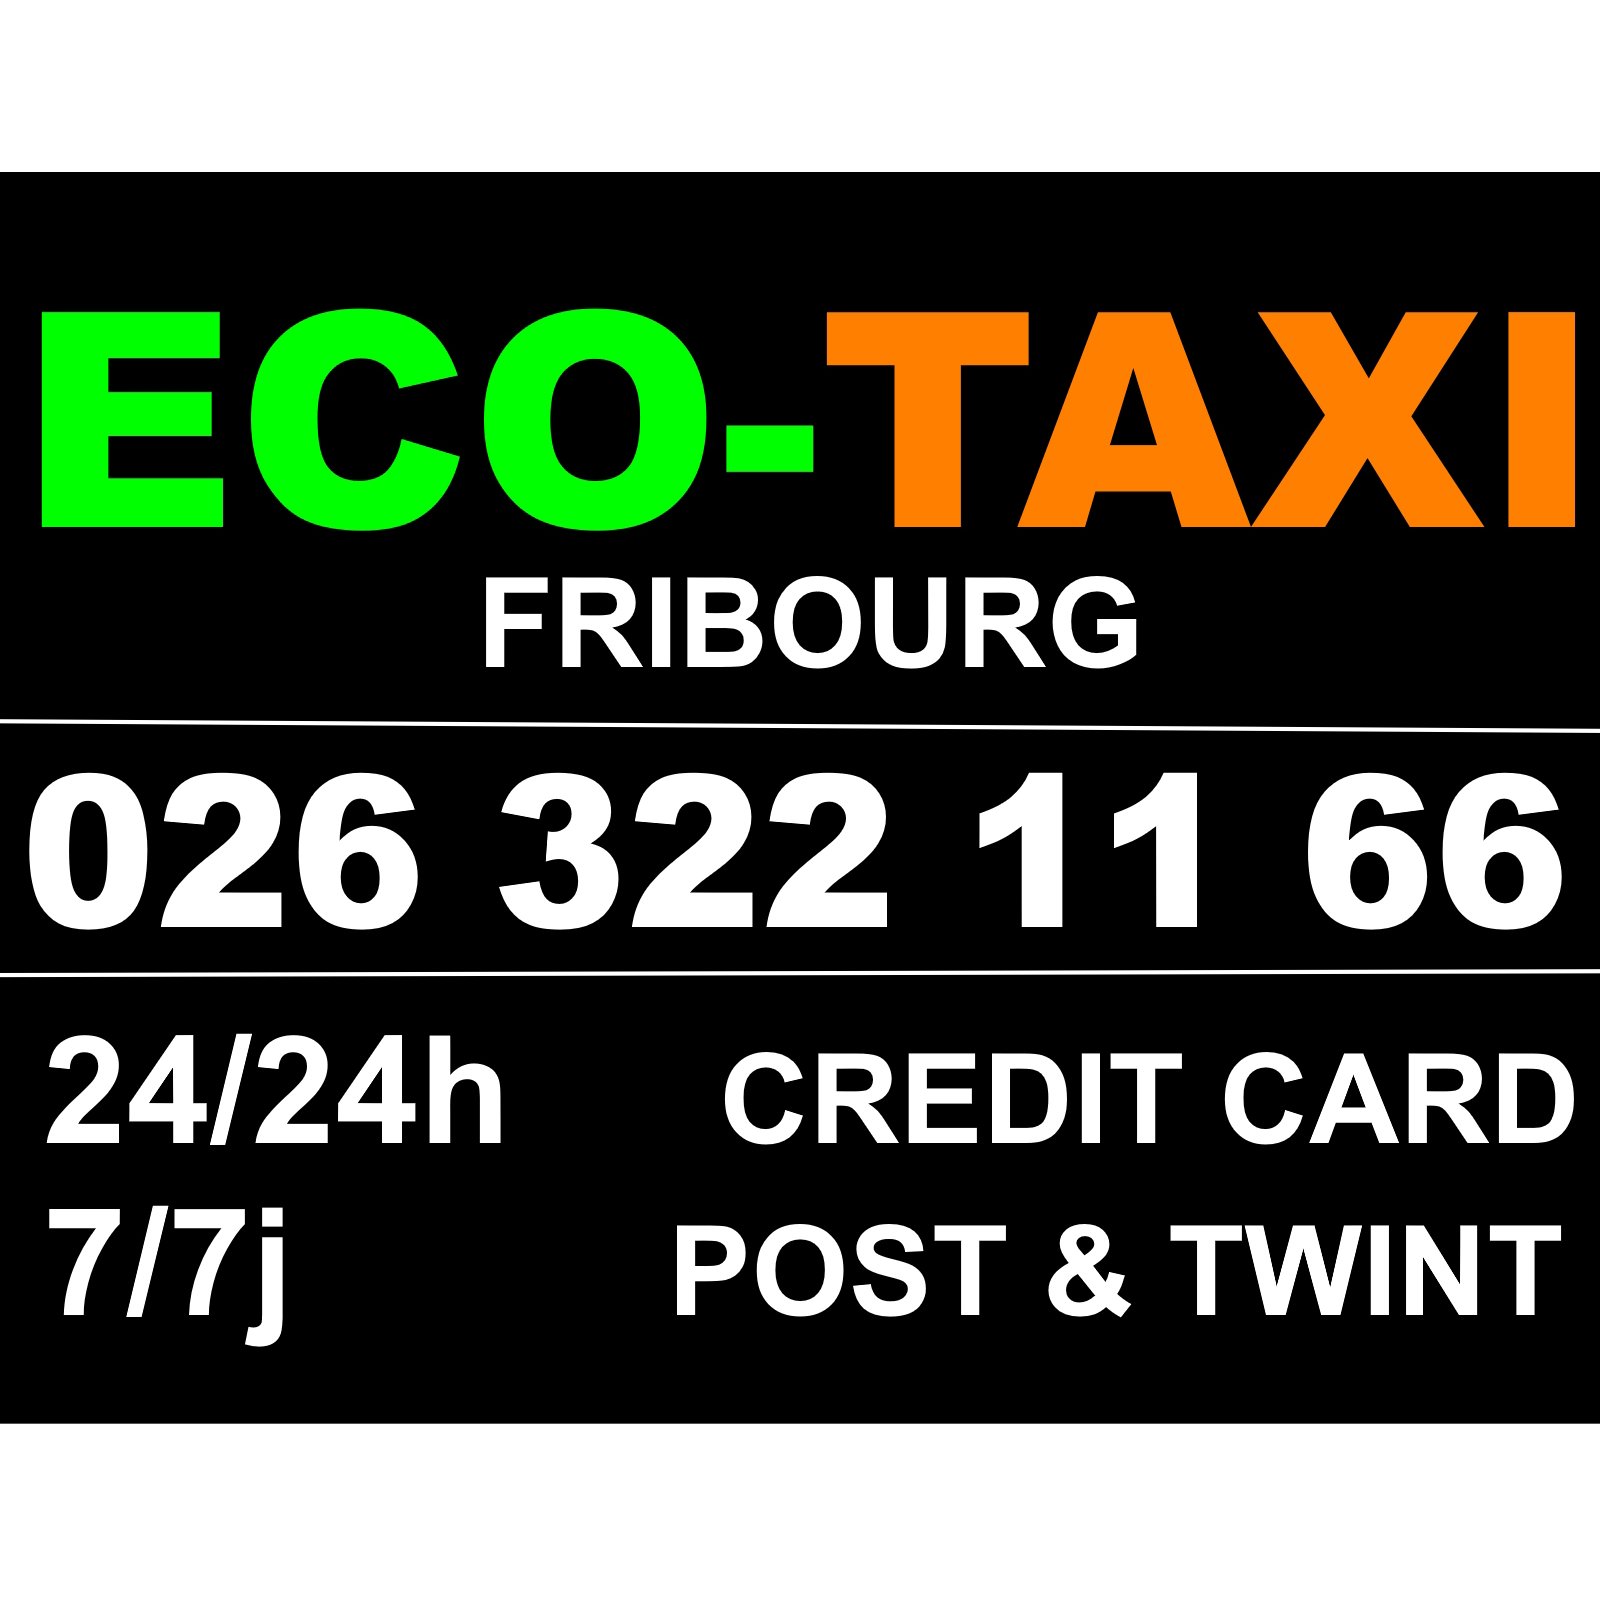 ECO-TAXI Fribourg Fribourg 026 322 11 66